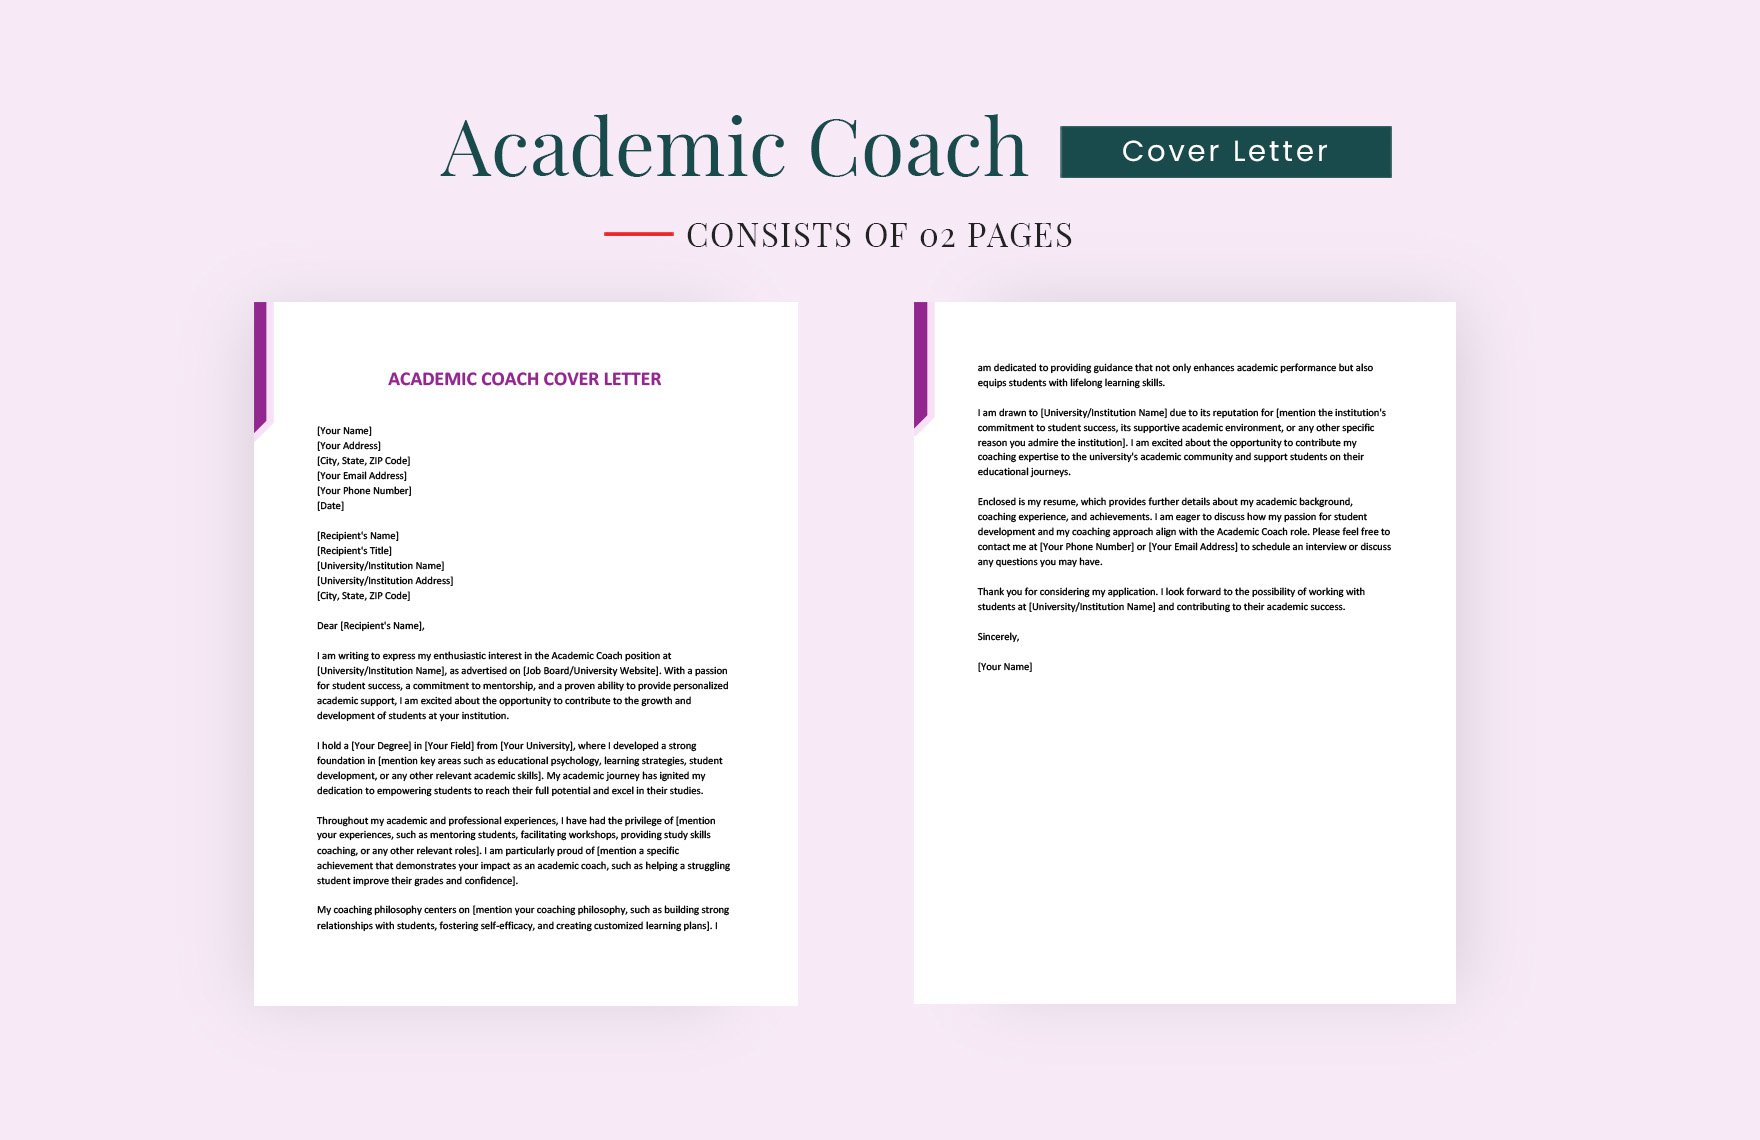 Academic Coach Cover Letter in Word, Google Docs